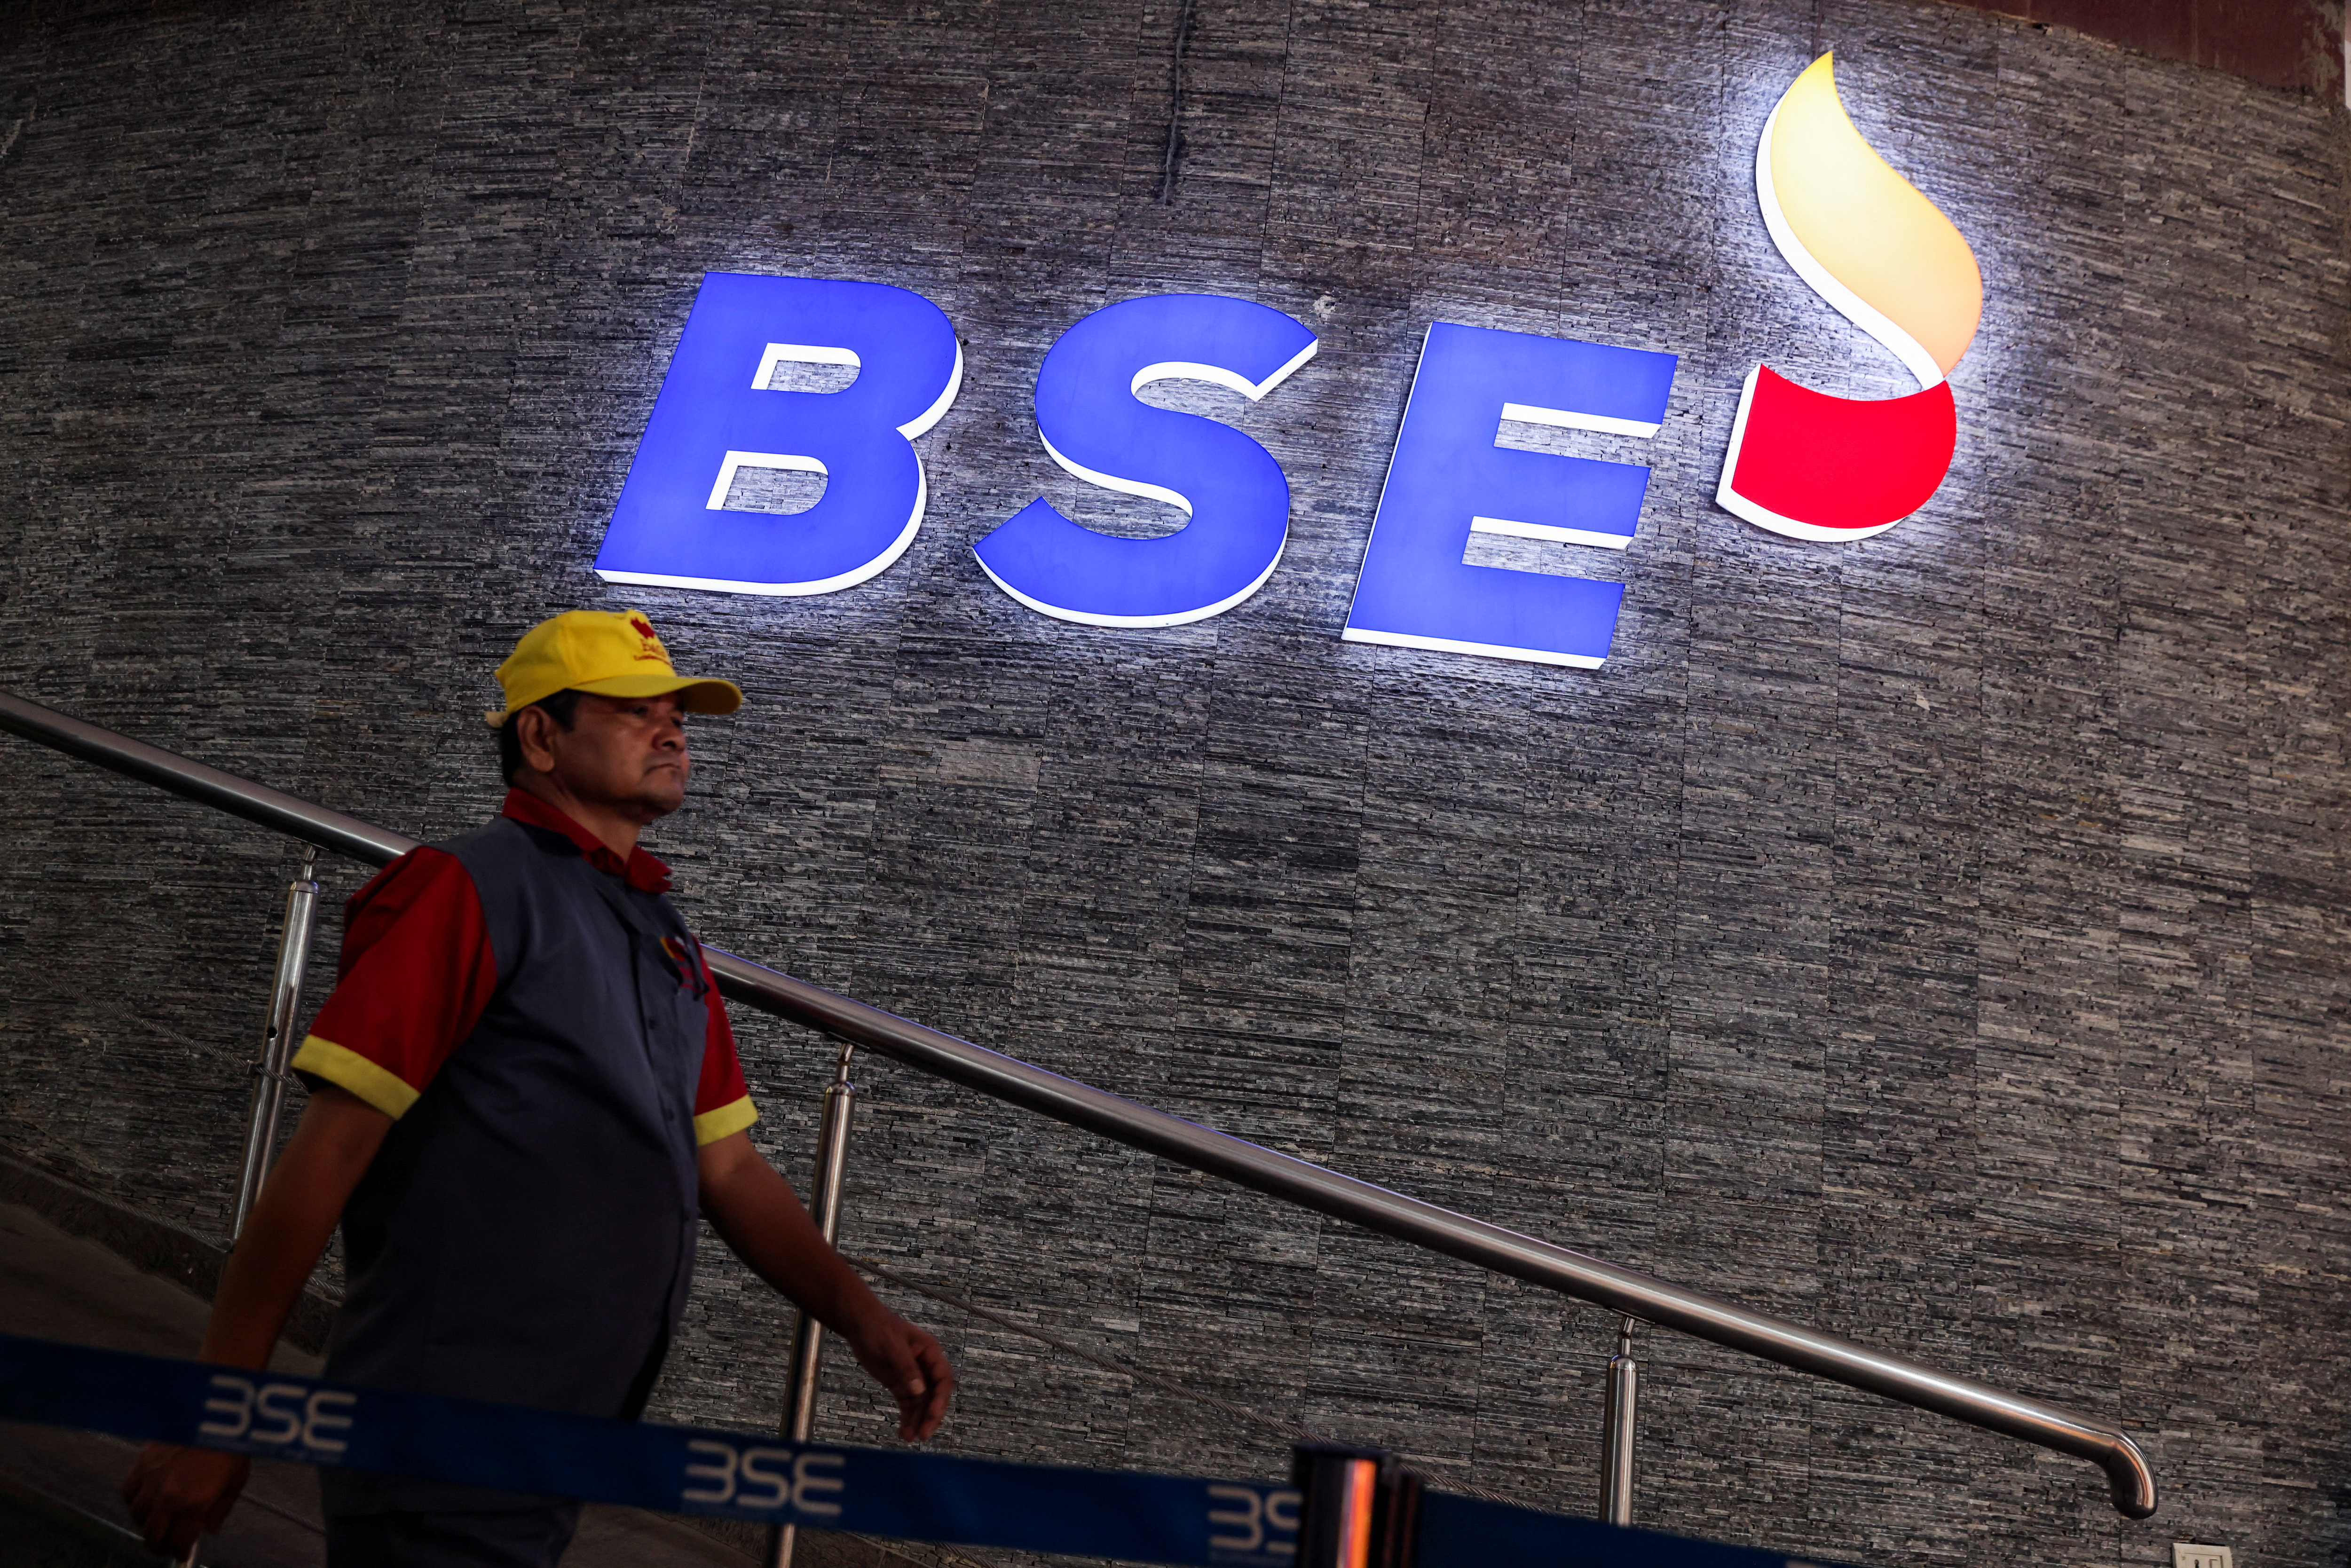 A man walks past the new logo of the Bombay Stock Exchange (BSE) building in Mumbai